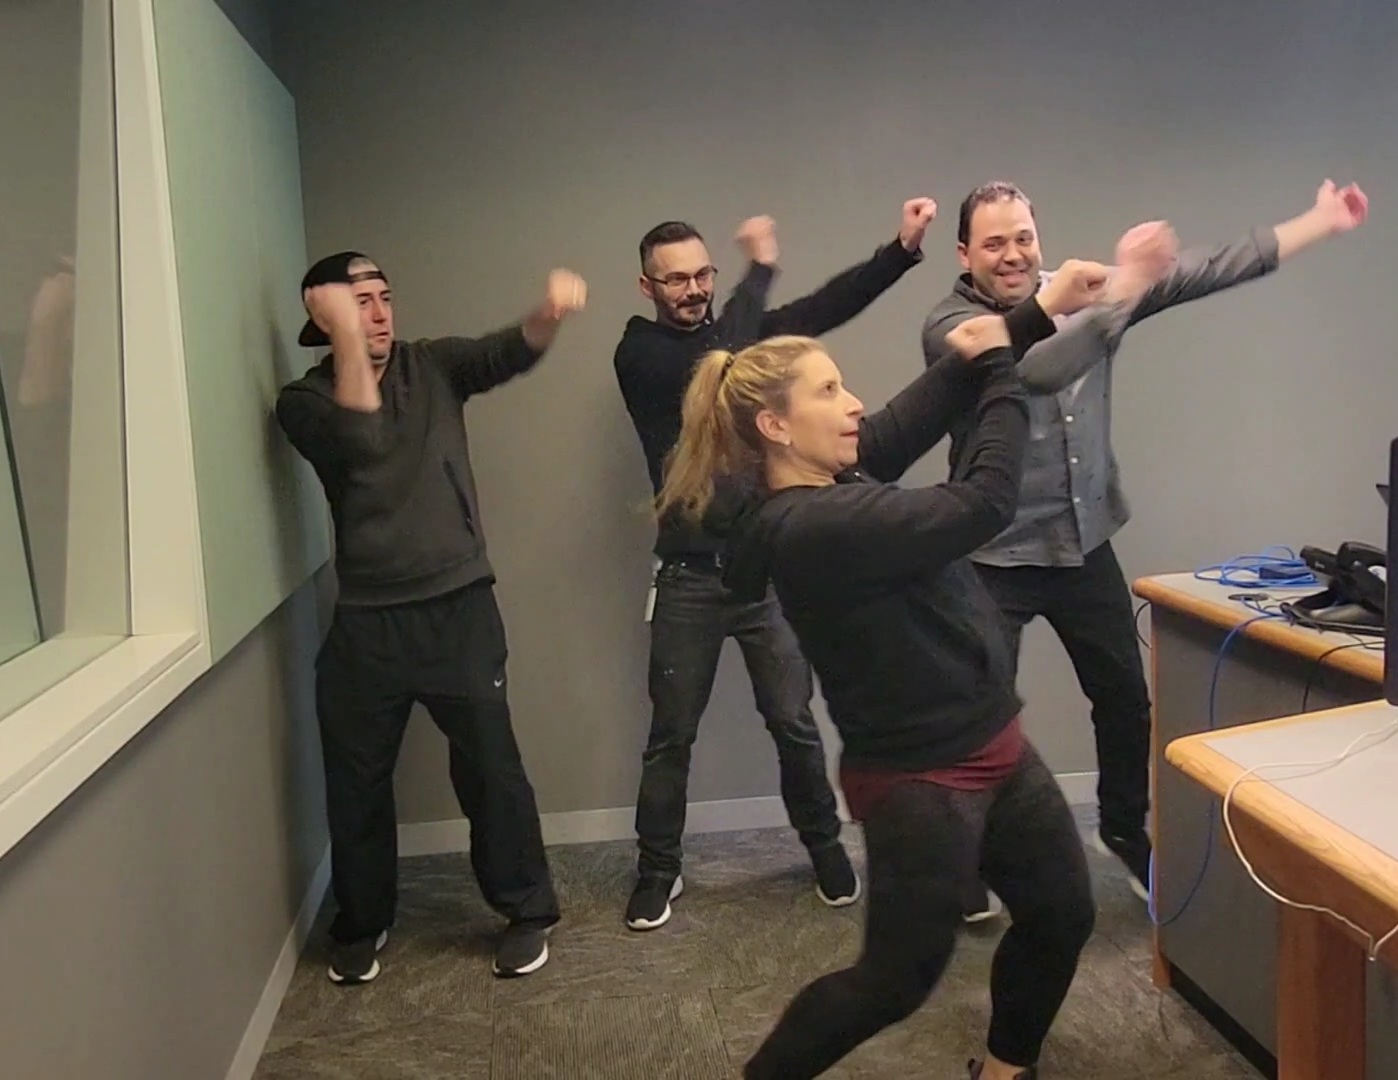 It’s International Dance Day So Anna Taught The Guys A New Routine!